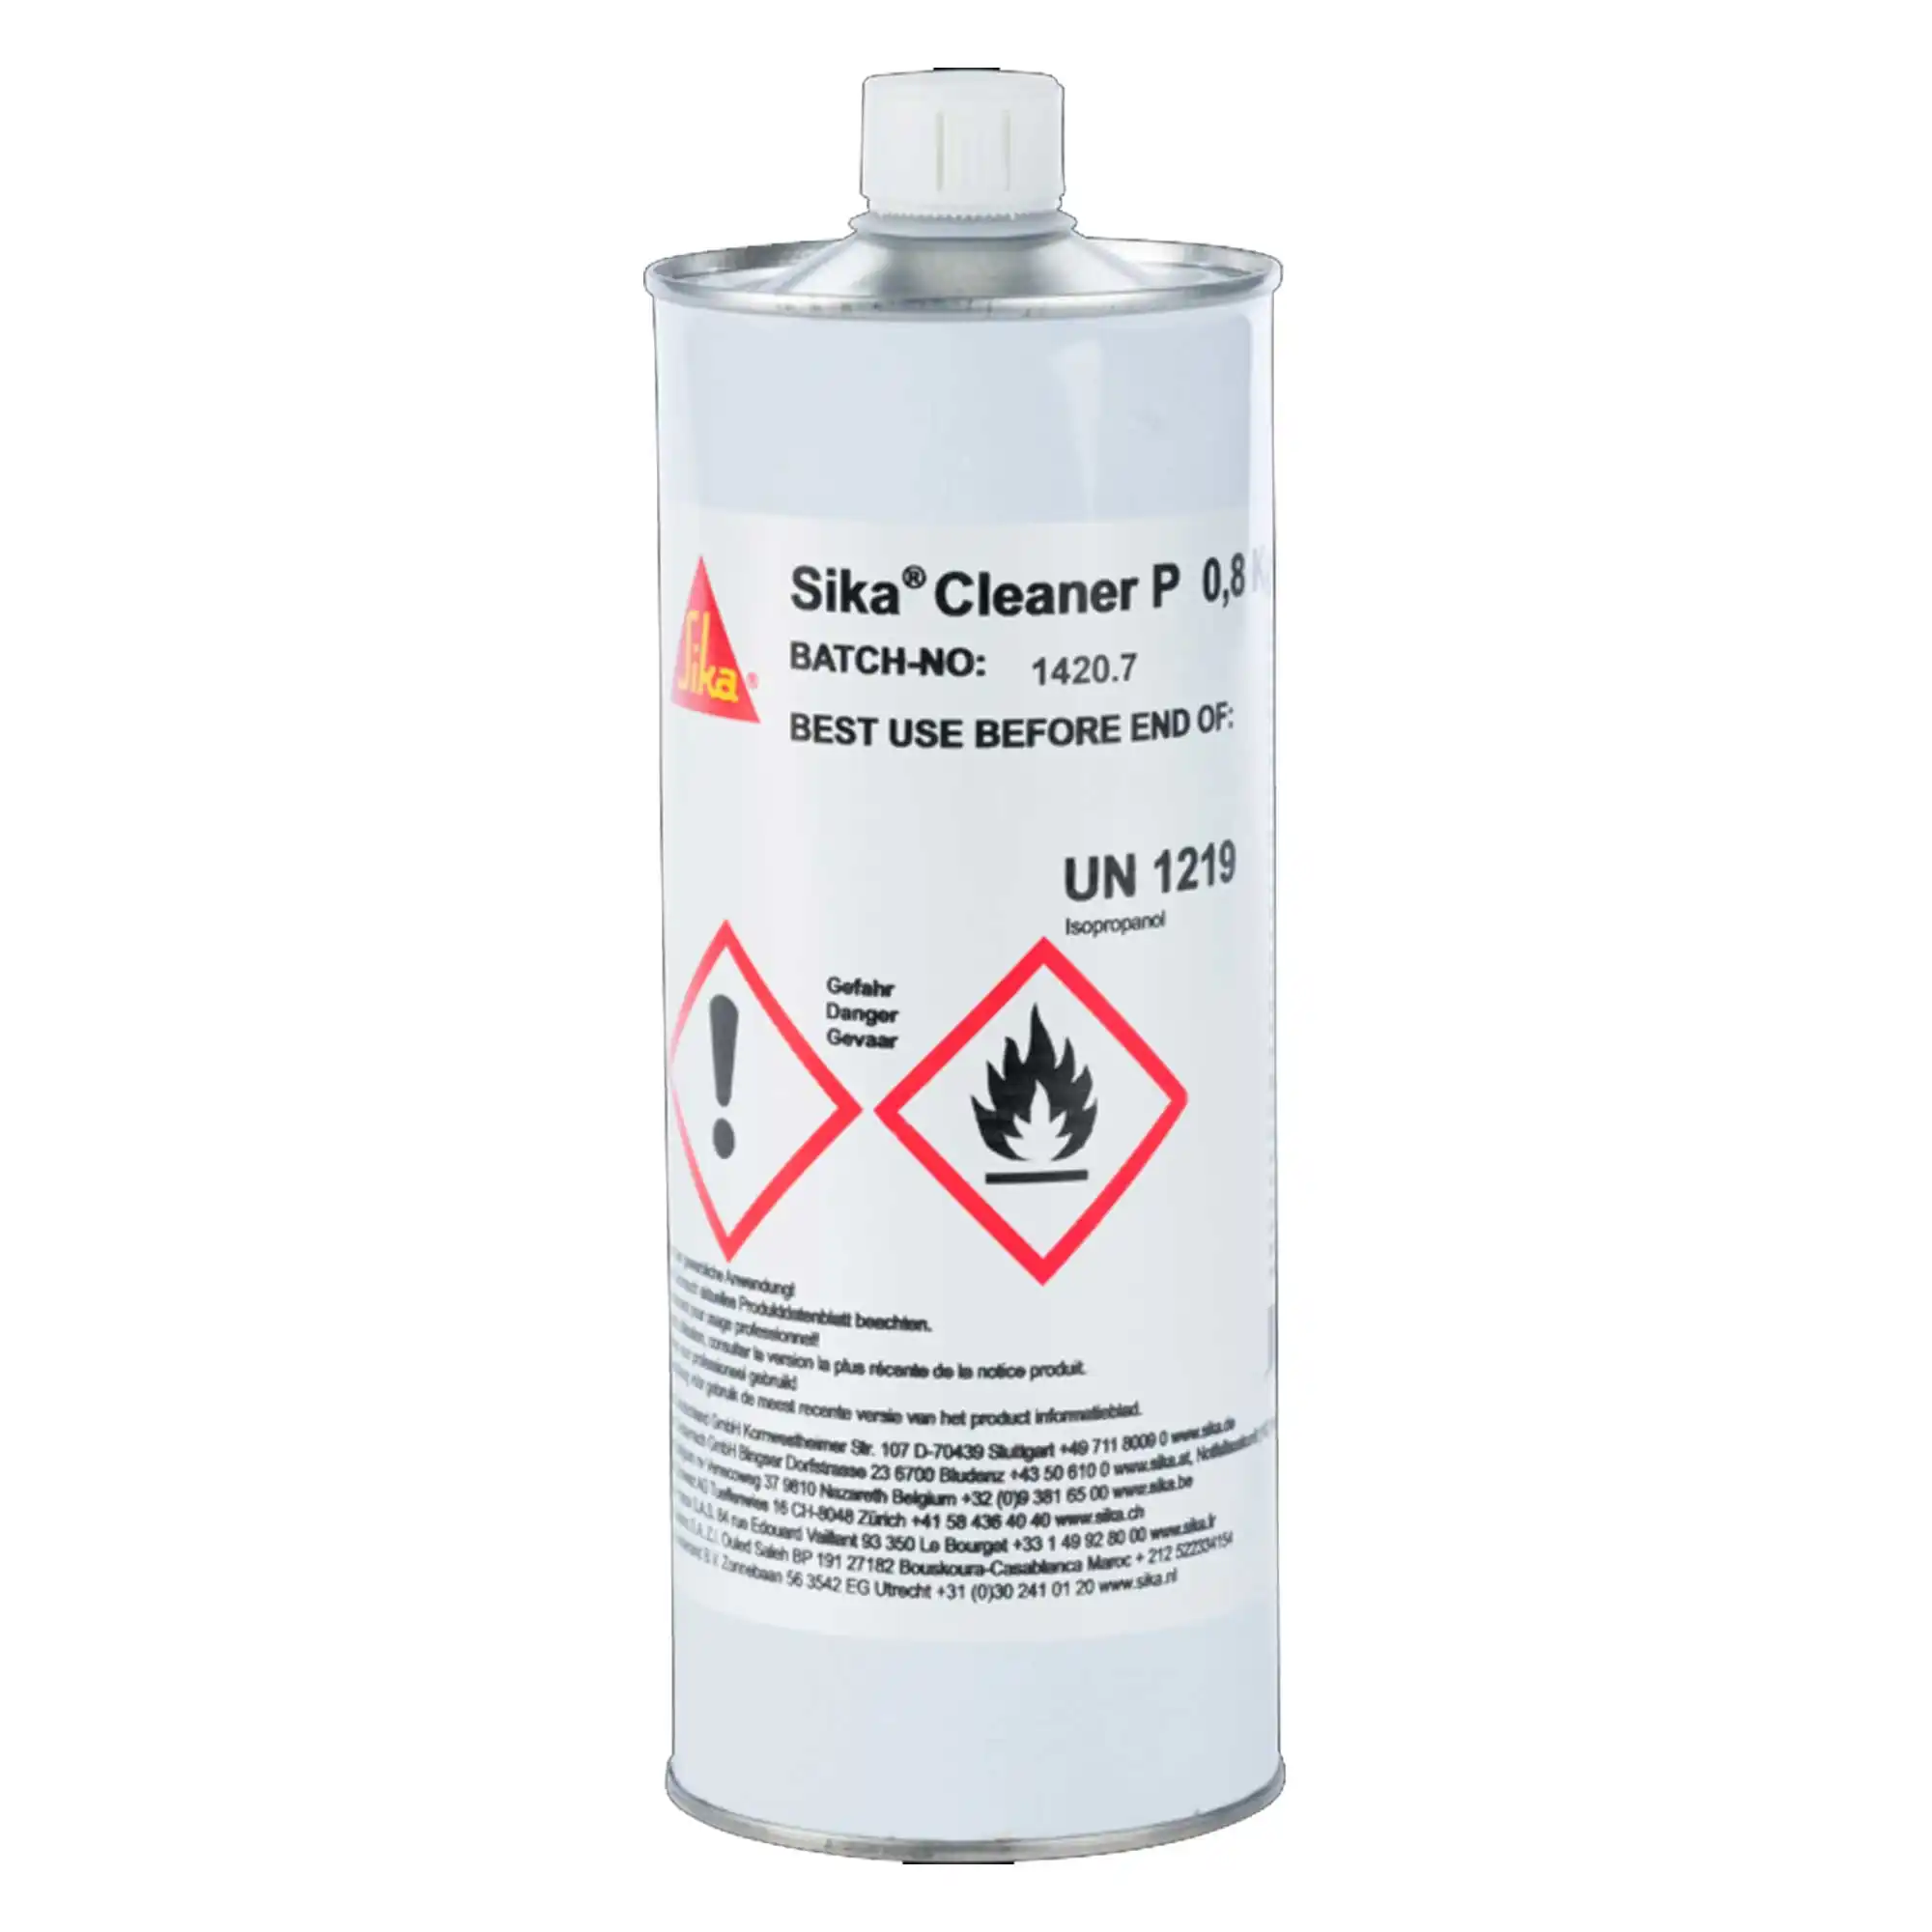 Sika Cleaner P